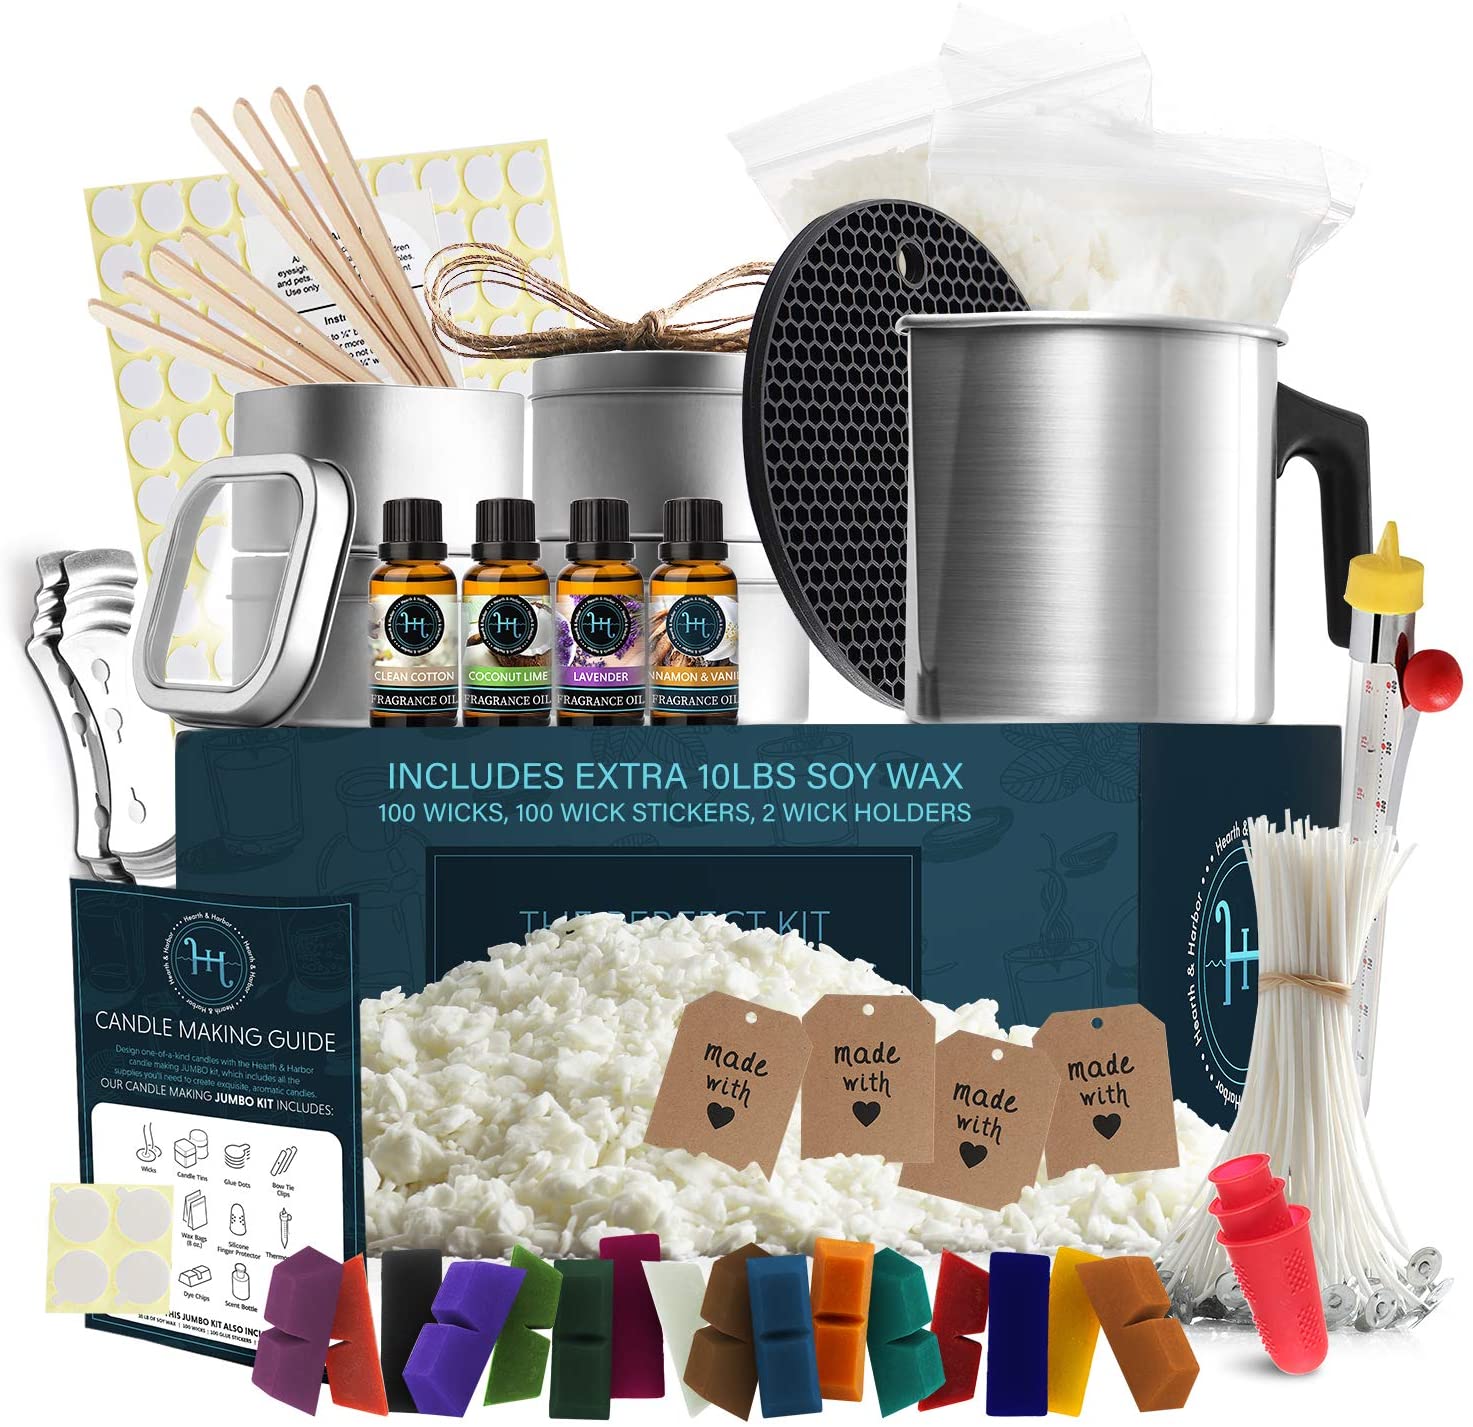 CandleScience Fall/Holiday Pro Candle Making Kit 1 Kit